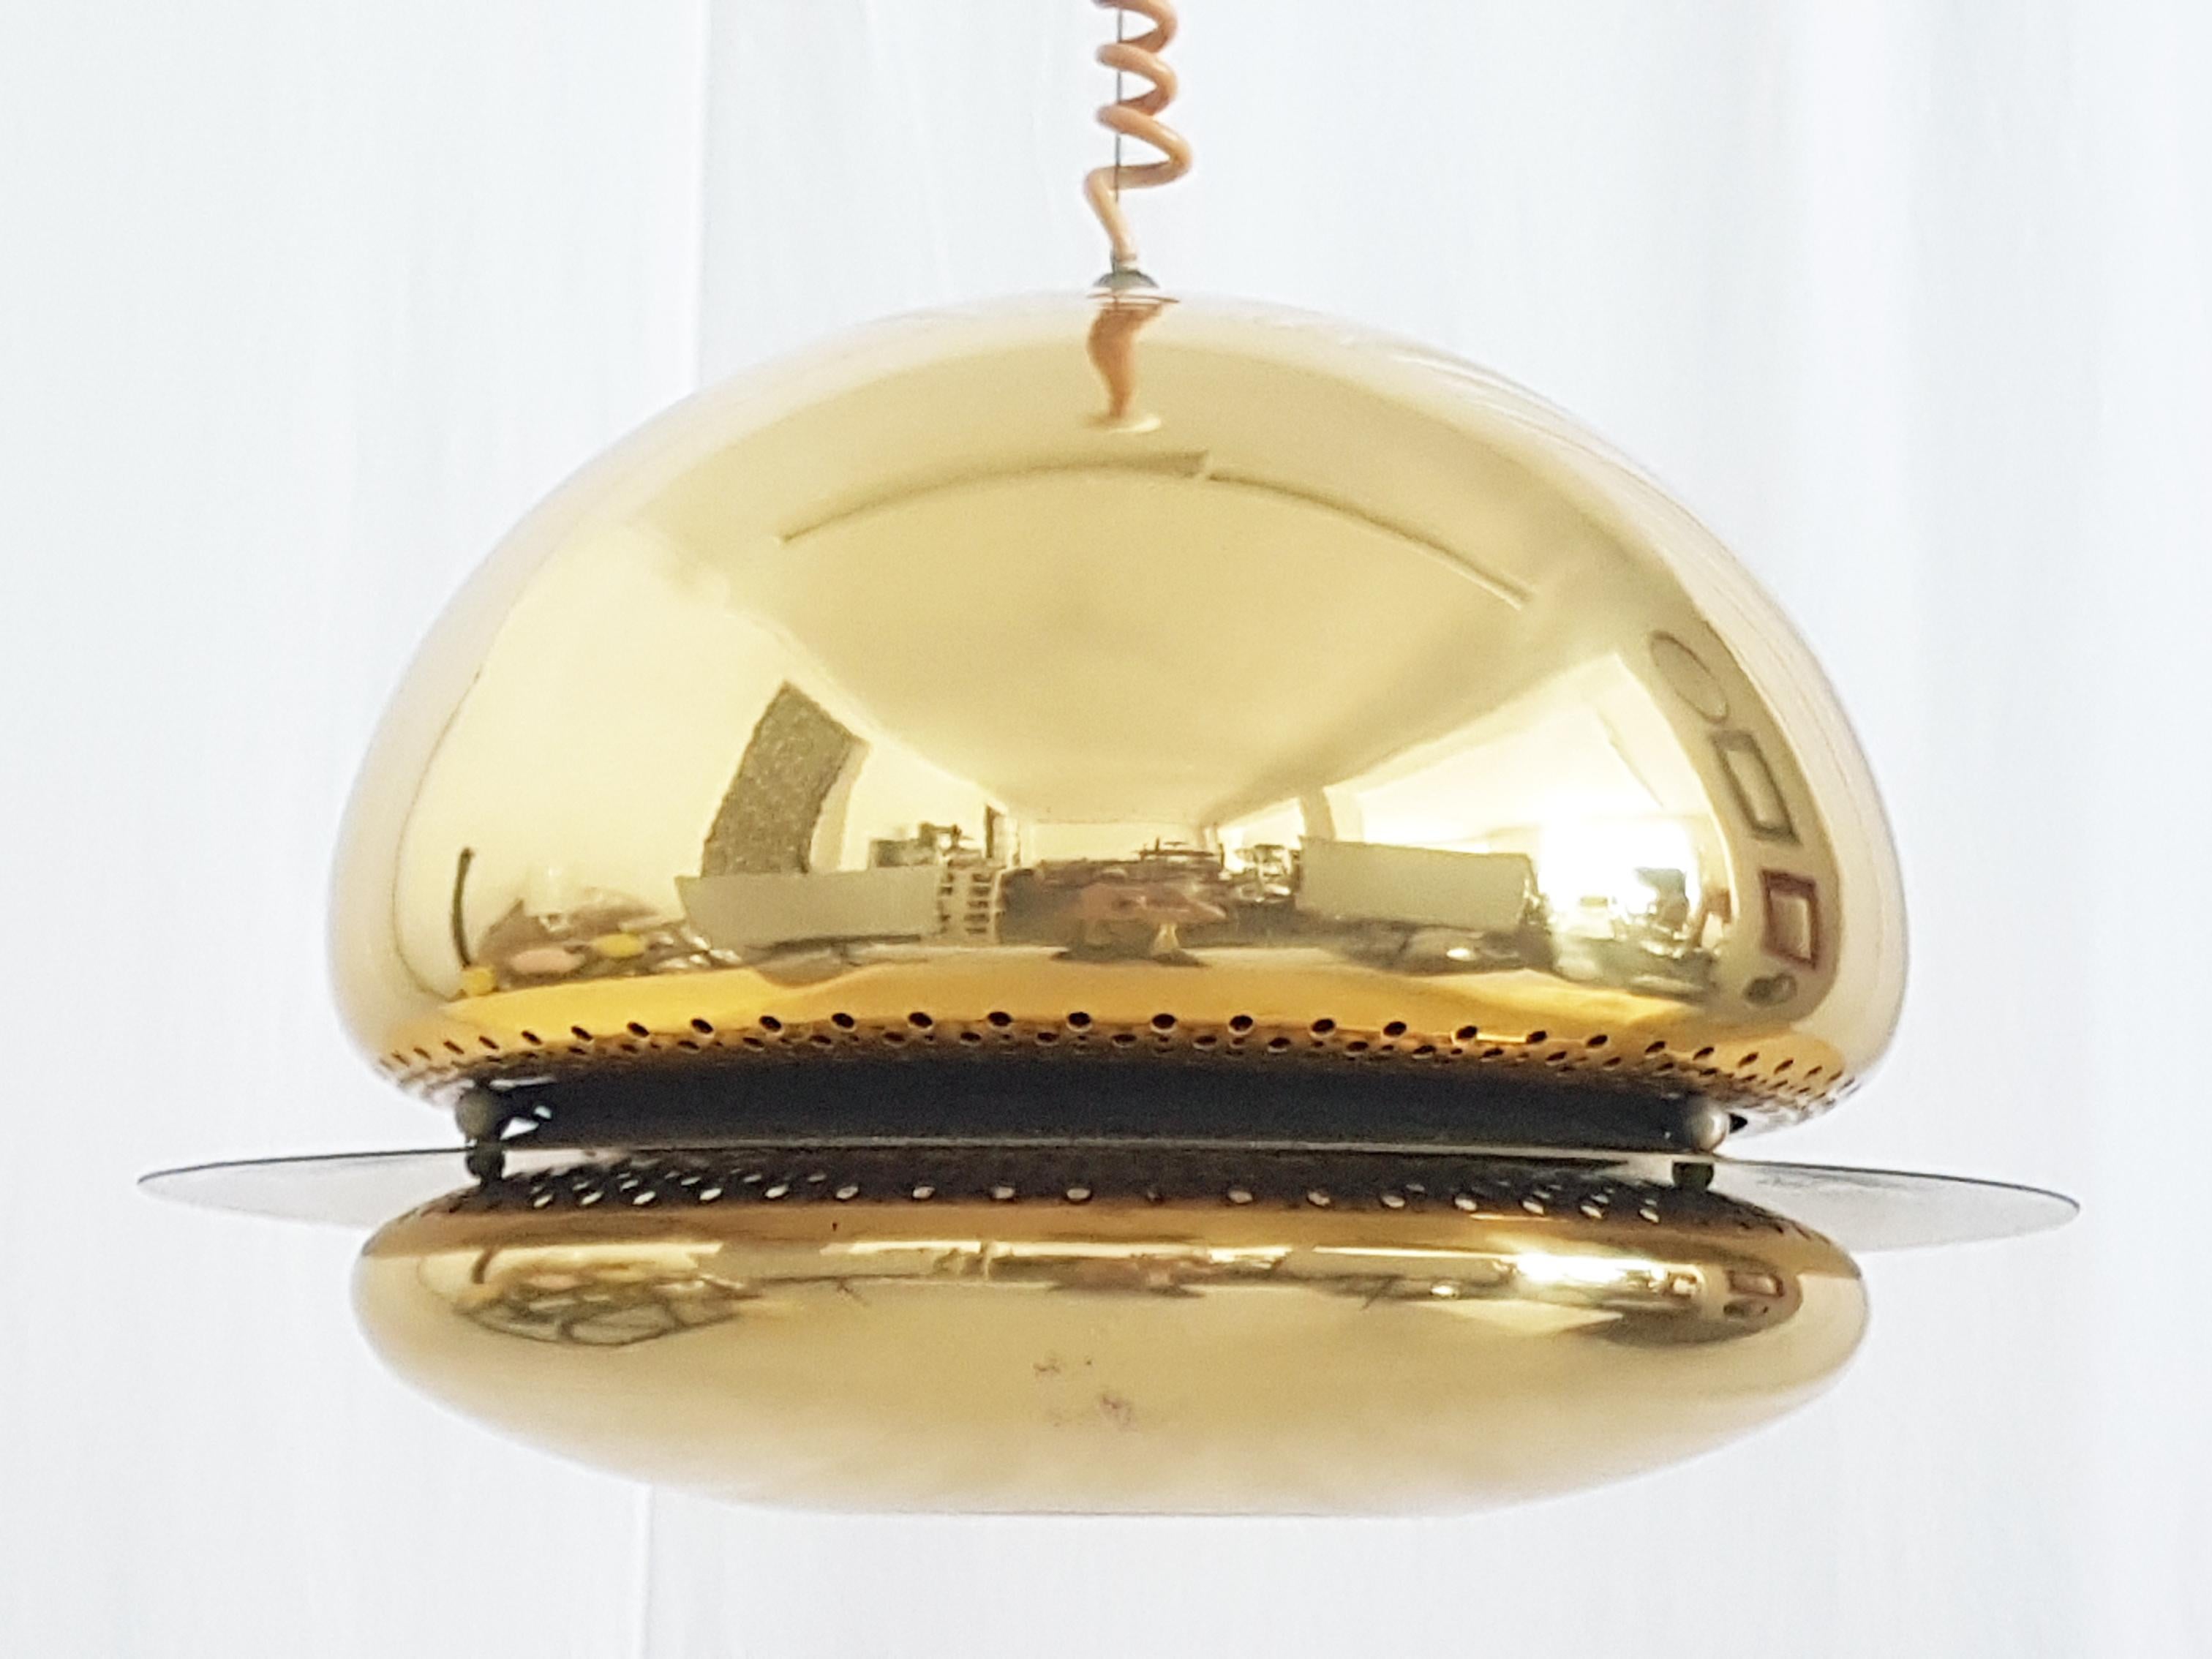 Golden metal and optical glass Nictea pendant by Afra e Tobia Scarpa for Flos. Very good condition, few light defects on brass shade as showed in pictures. Surface has been partially polished. All parts including electrical system are